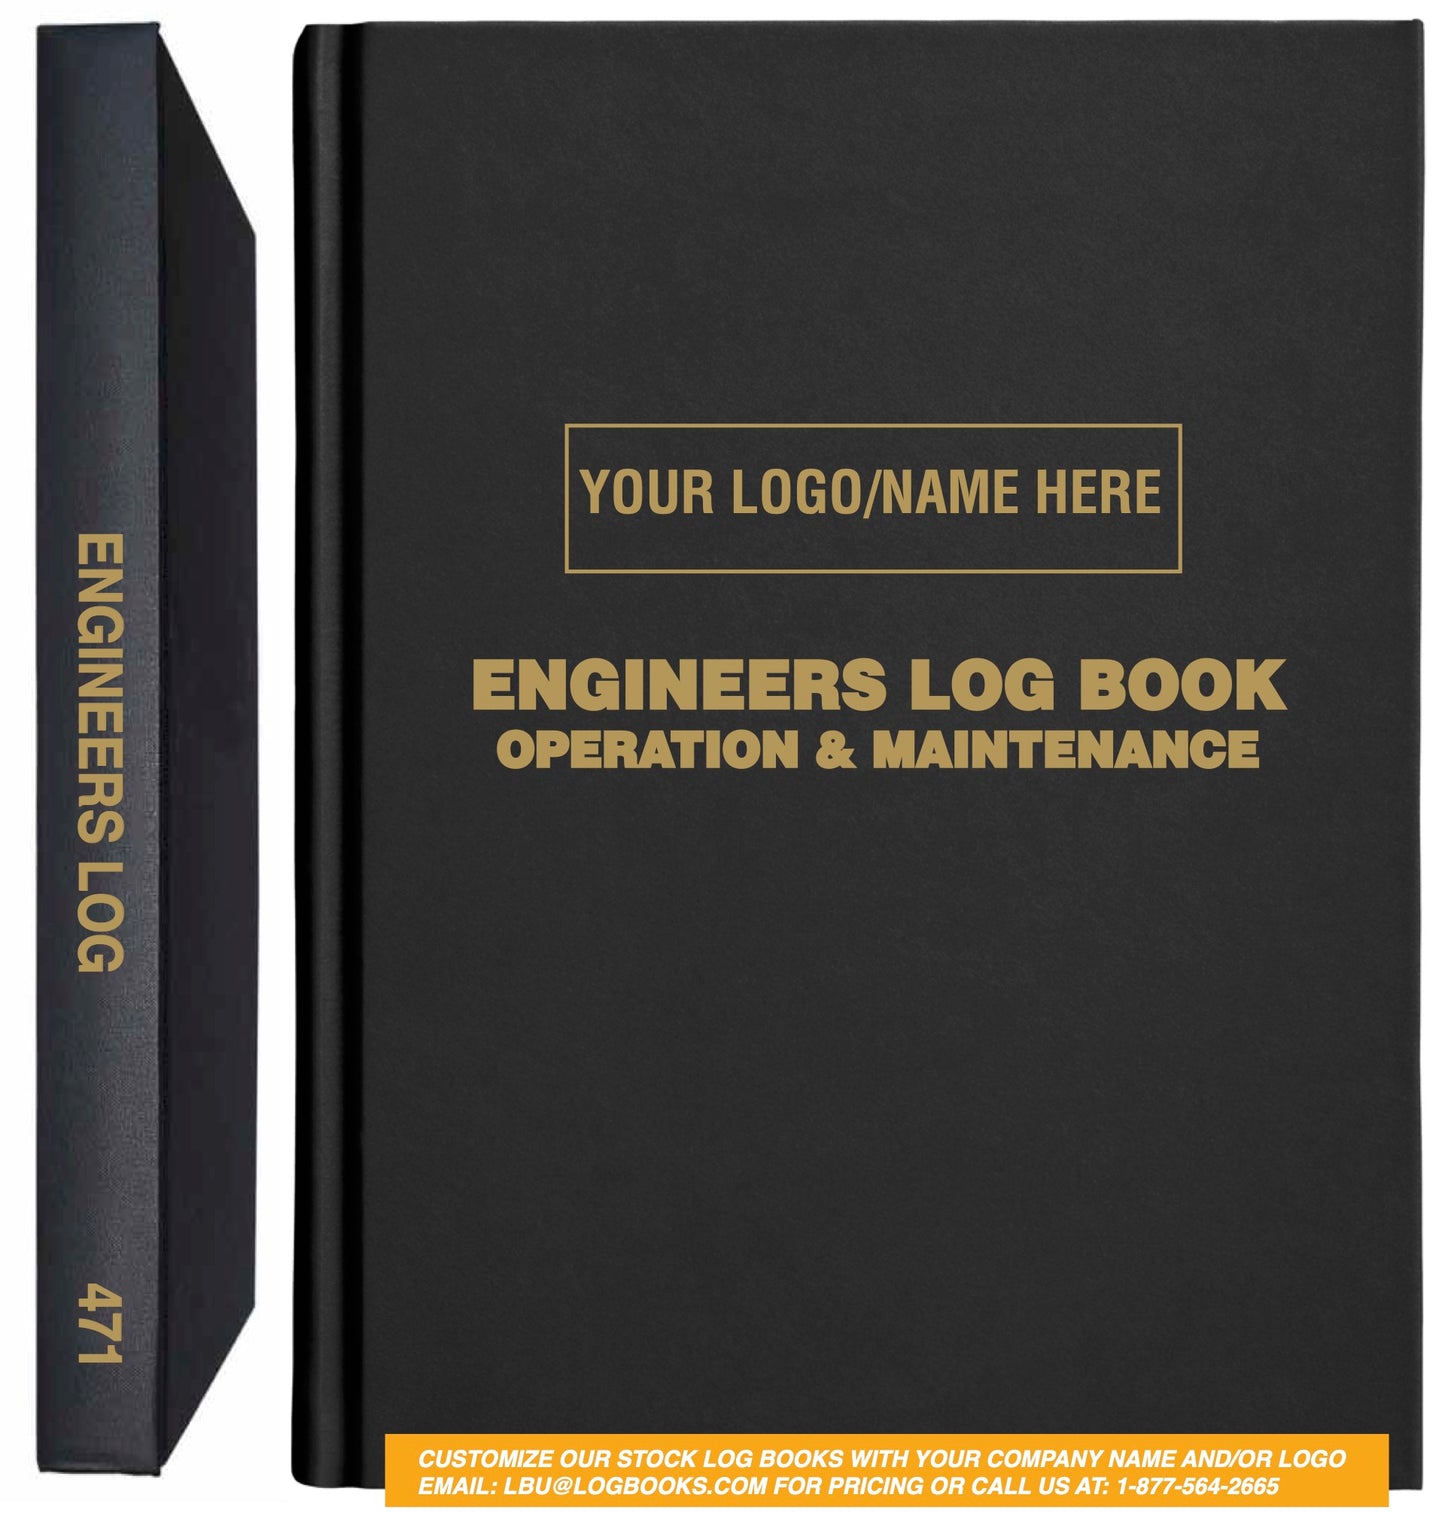 Engineers (1 Shift per page) Log Book #471